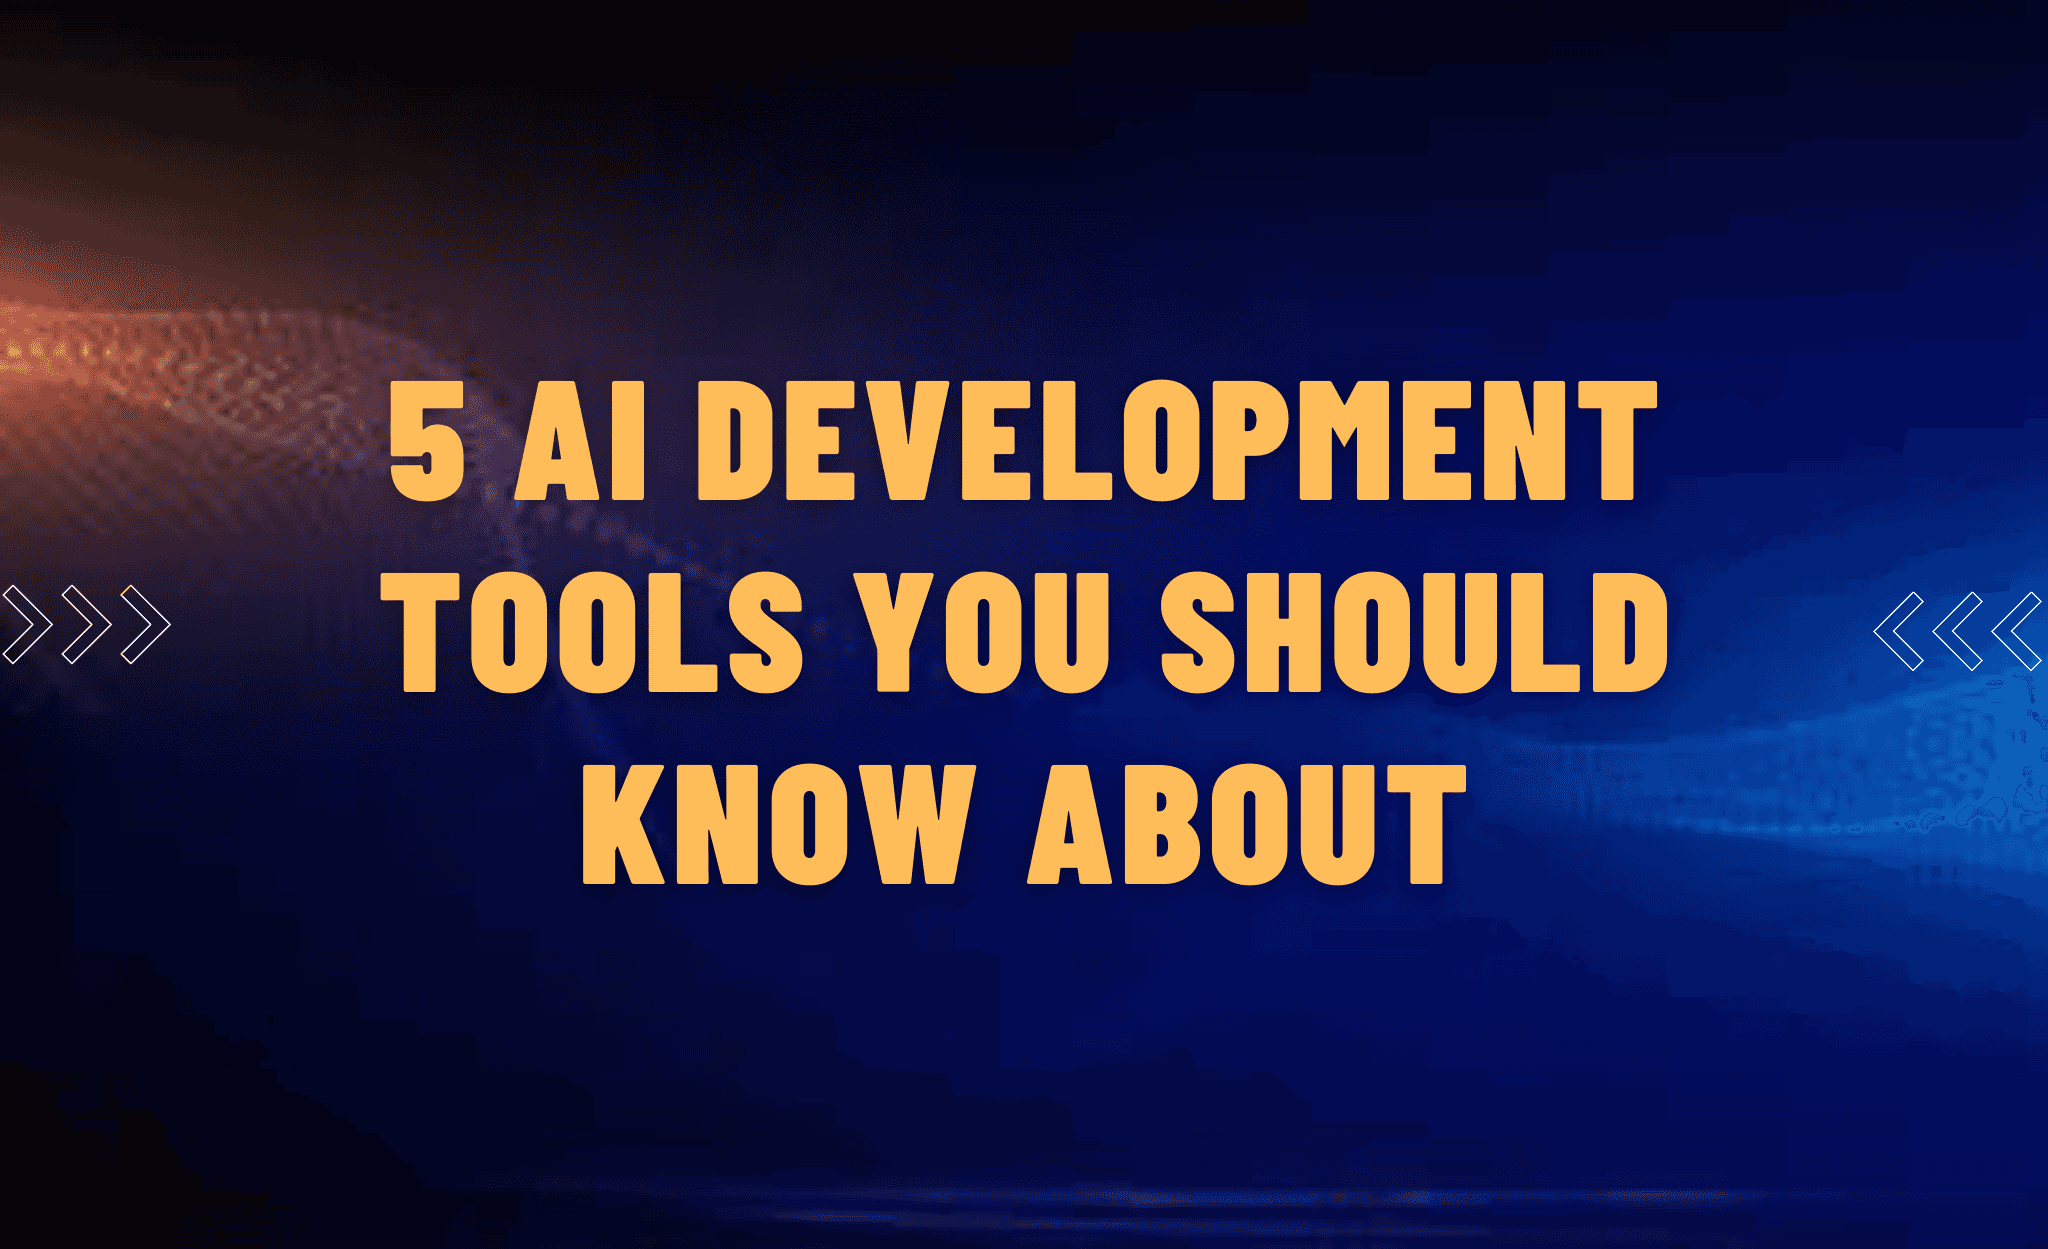 5 AI development tools you should know about